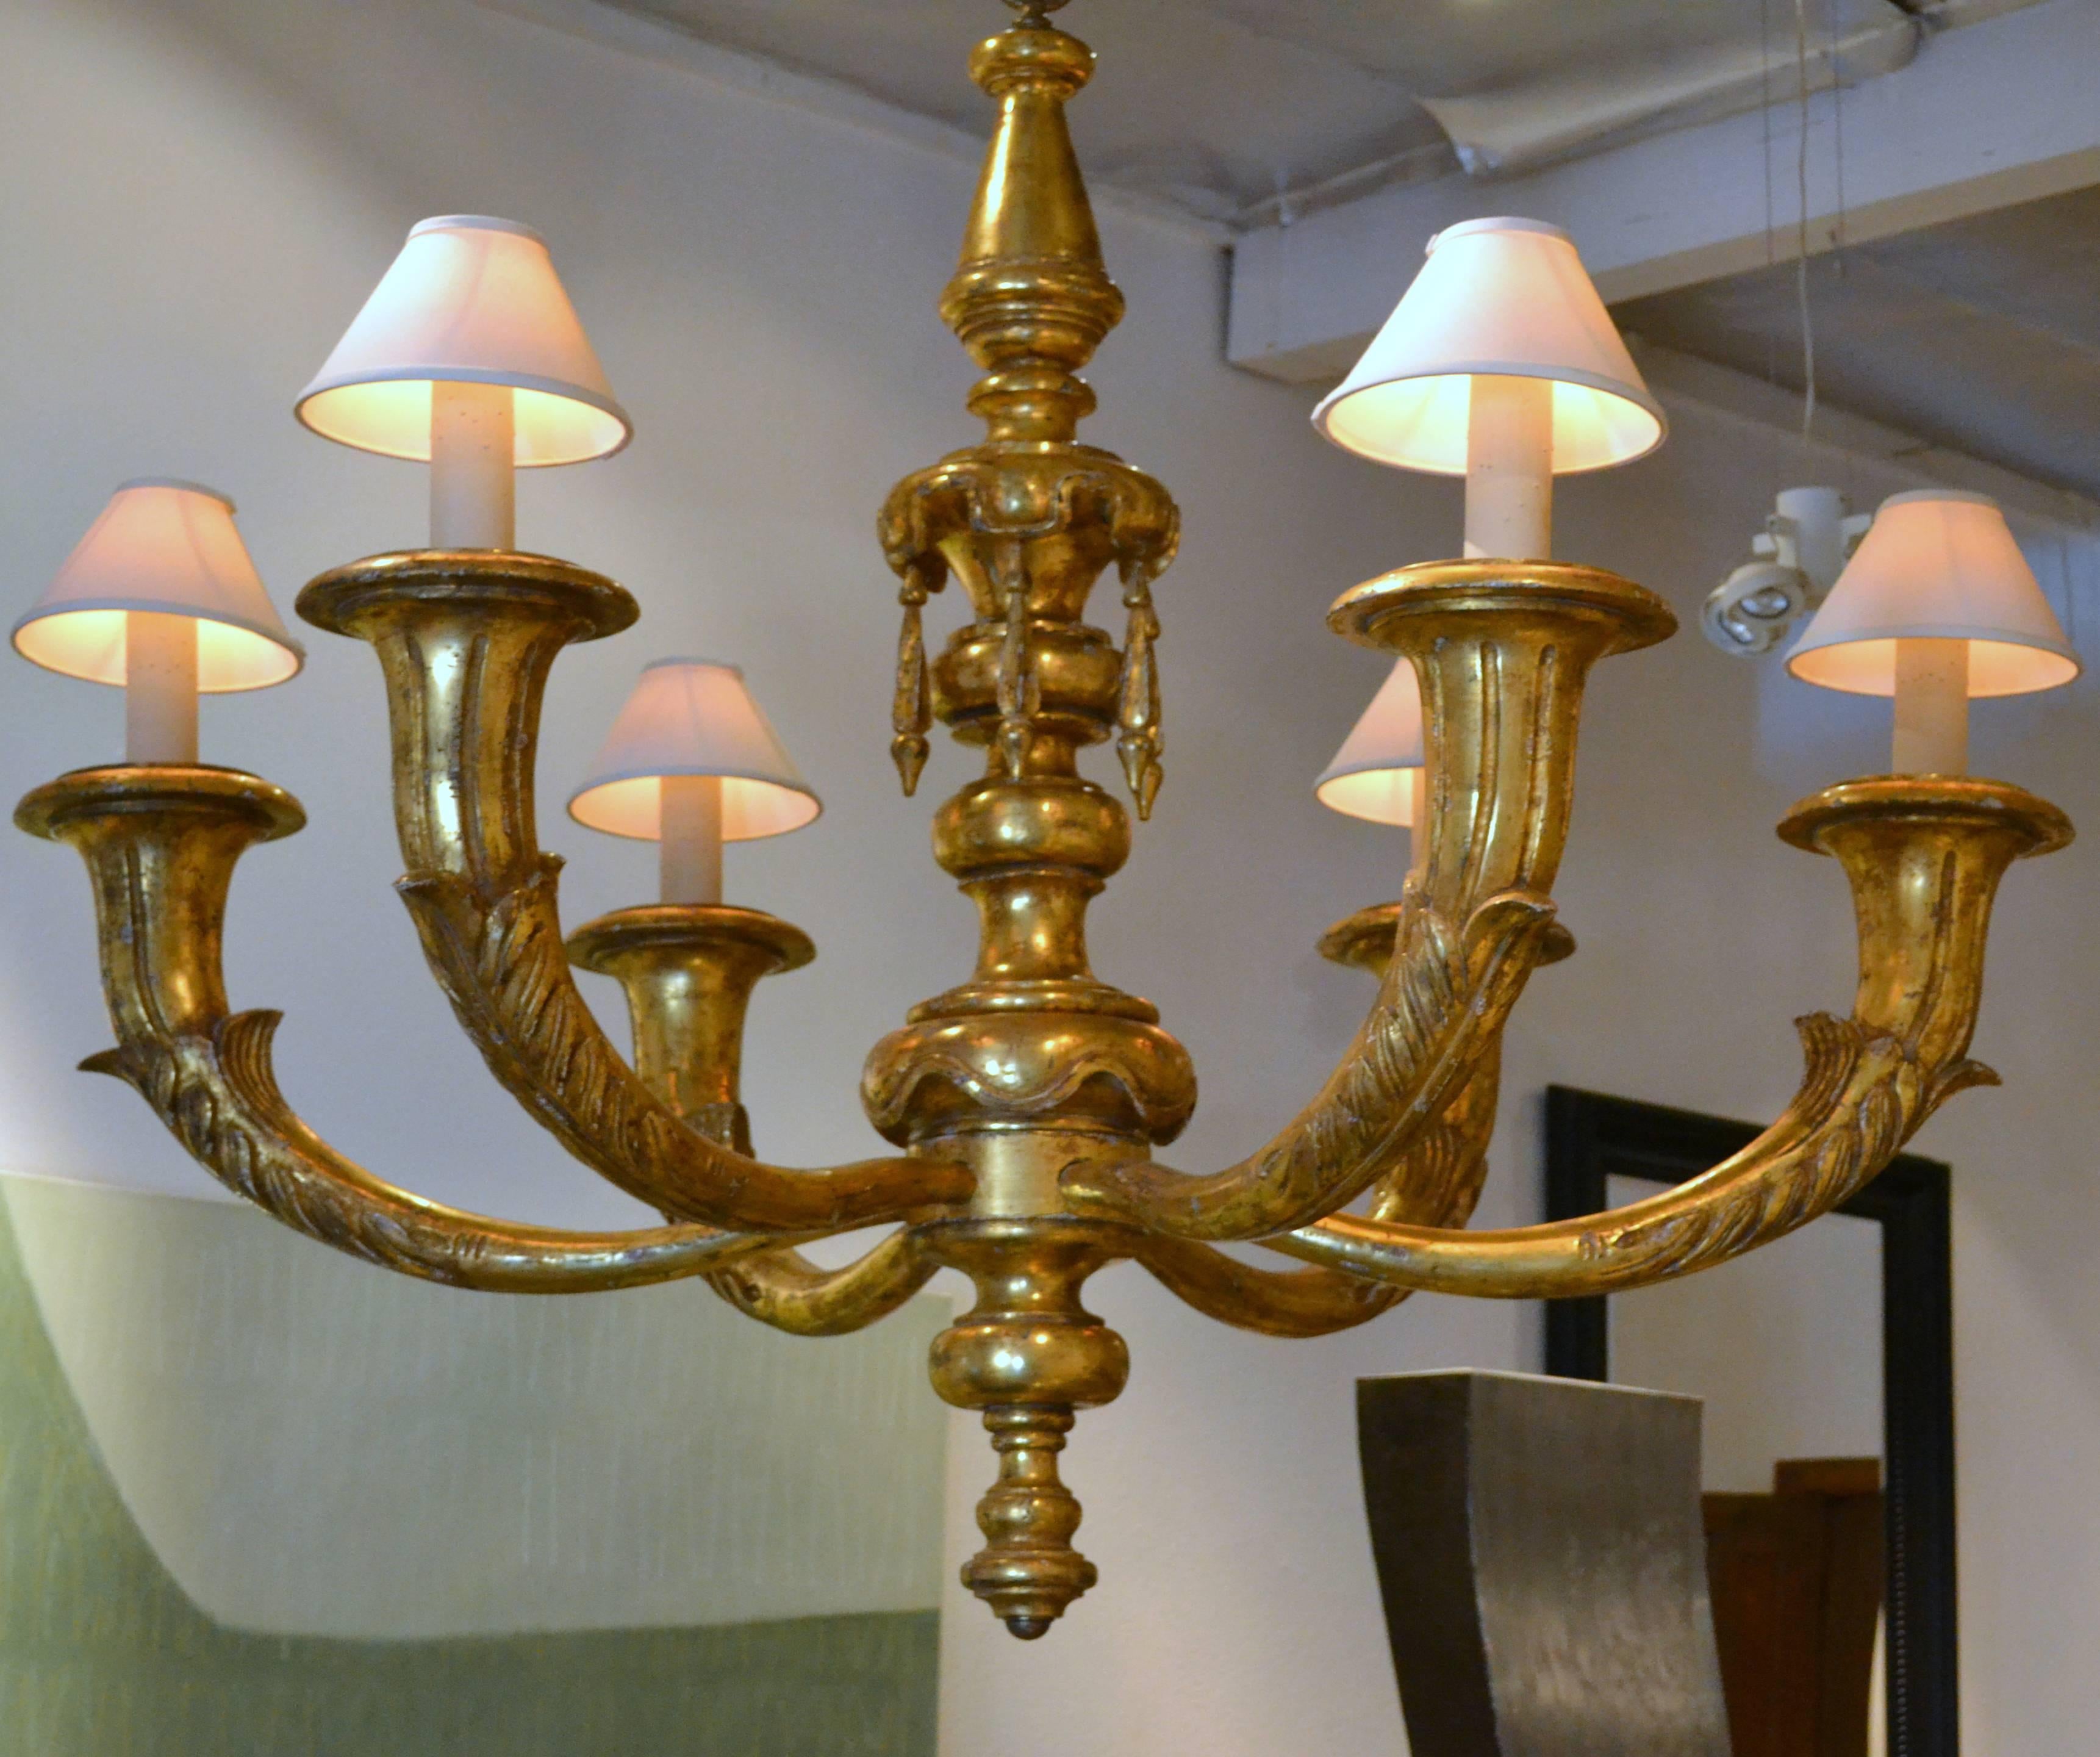 The mere size of this absolutely impressive giltwood chandelier will attract your attention. It is a six-arm giltwood chandelier with giltwood hanging tassels. The faux candlesticks are shielded with ivory fabric shades. The chandelier measures over